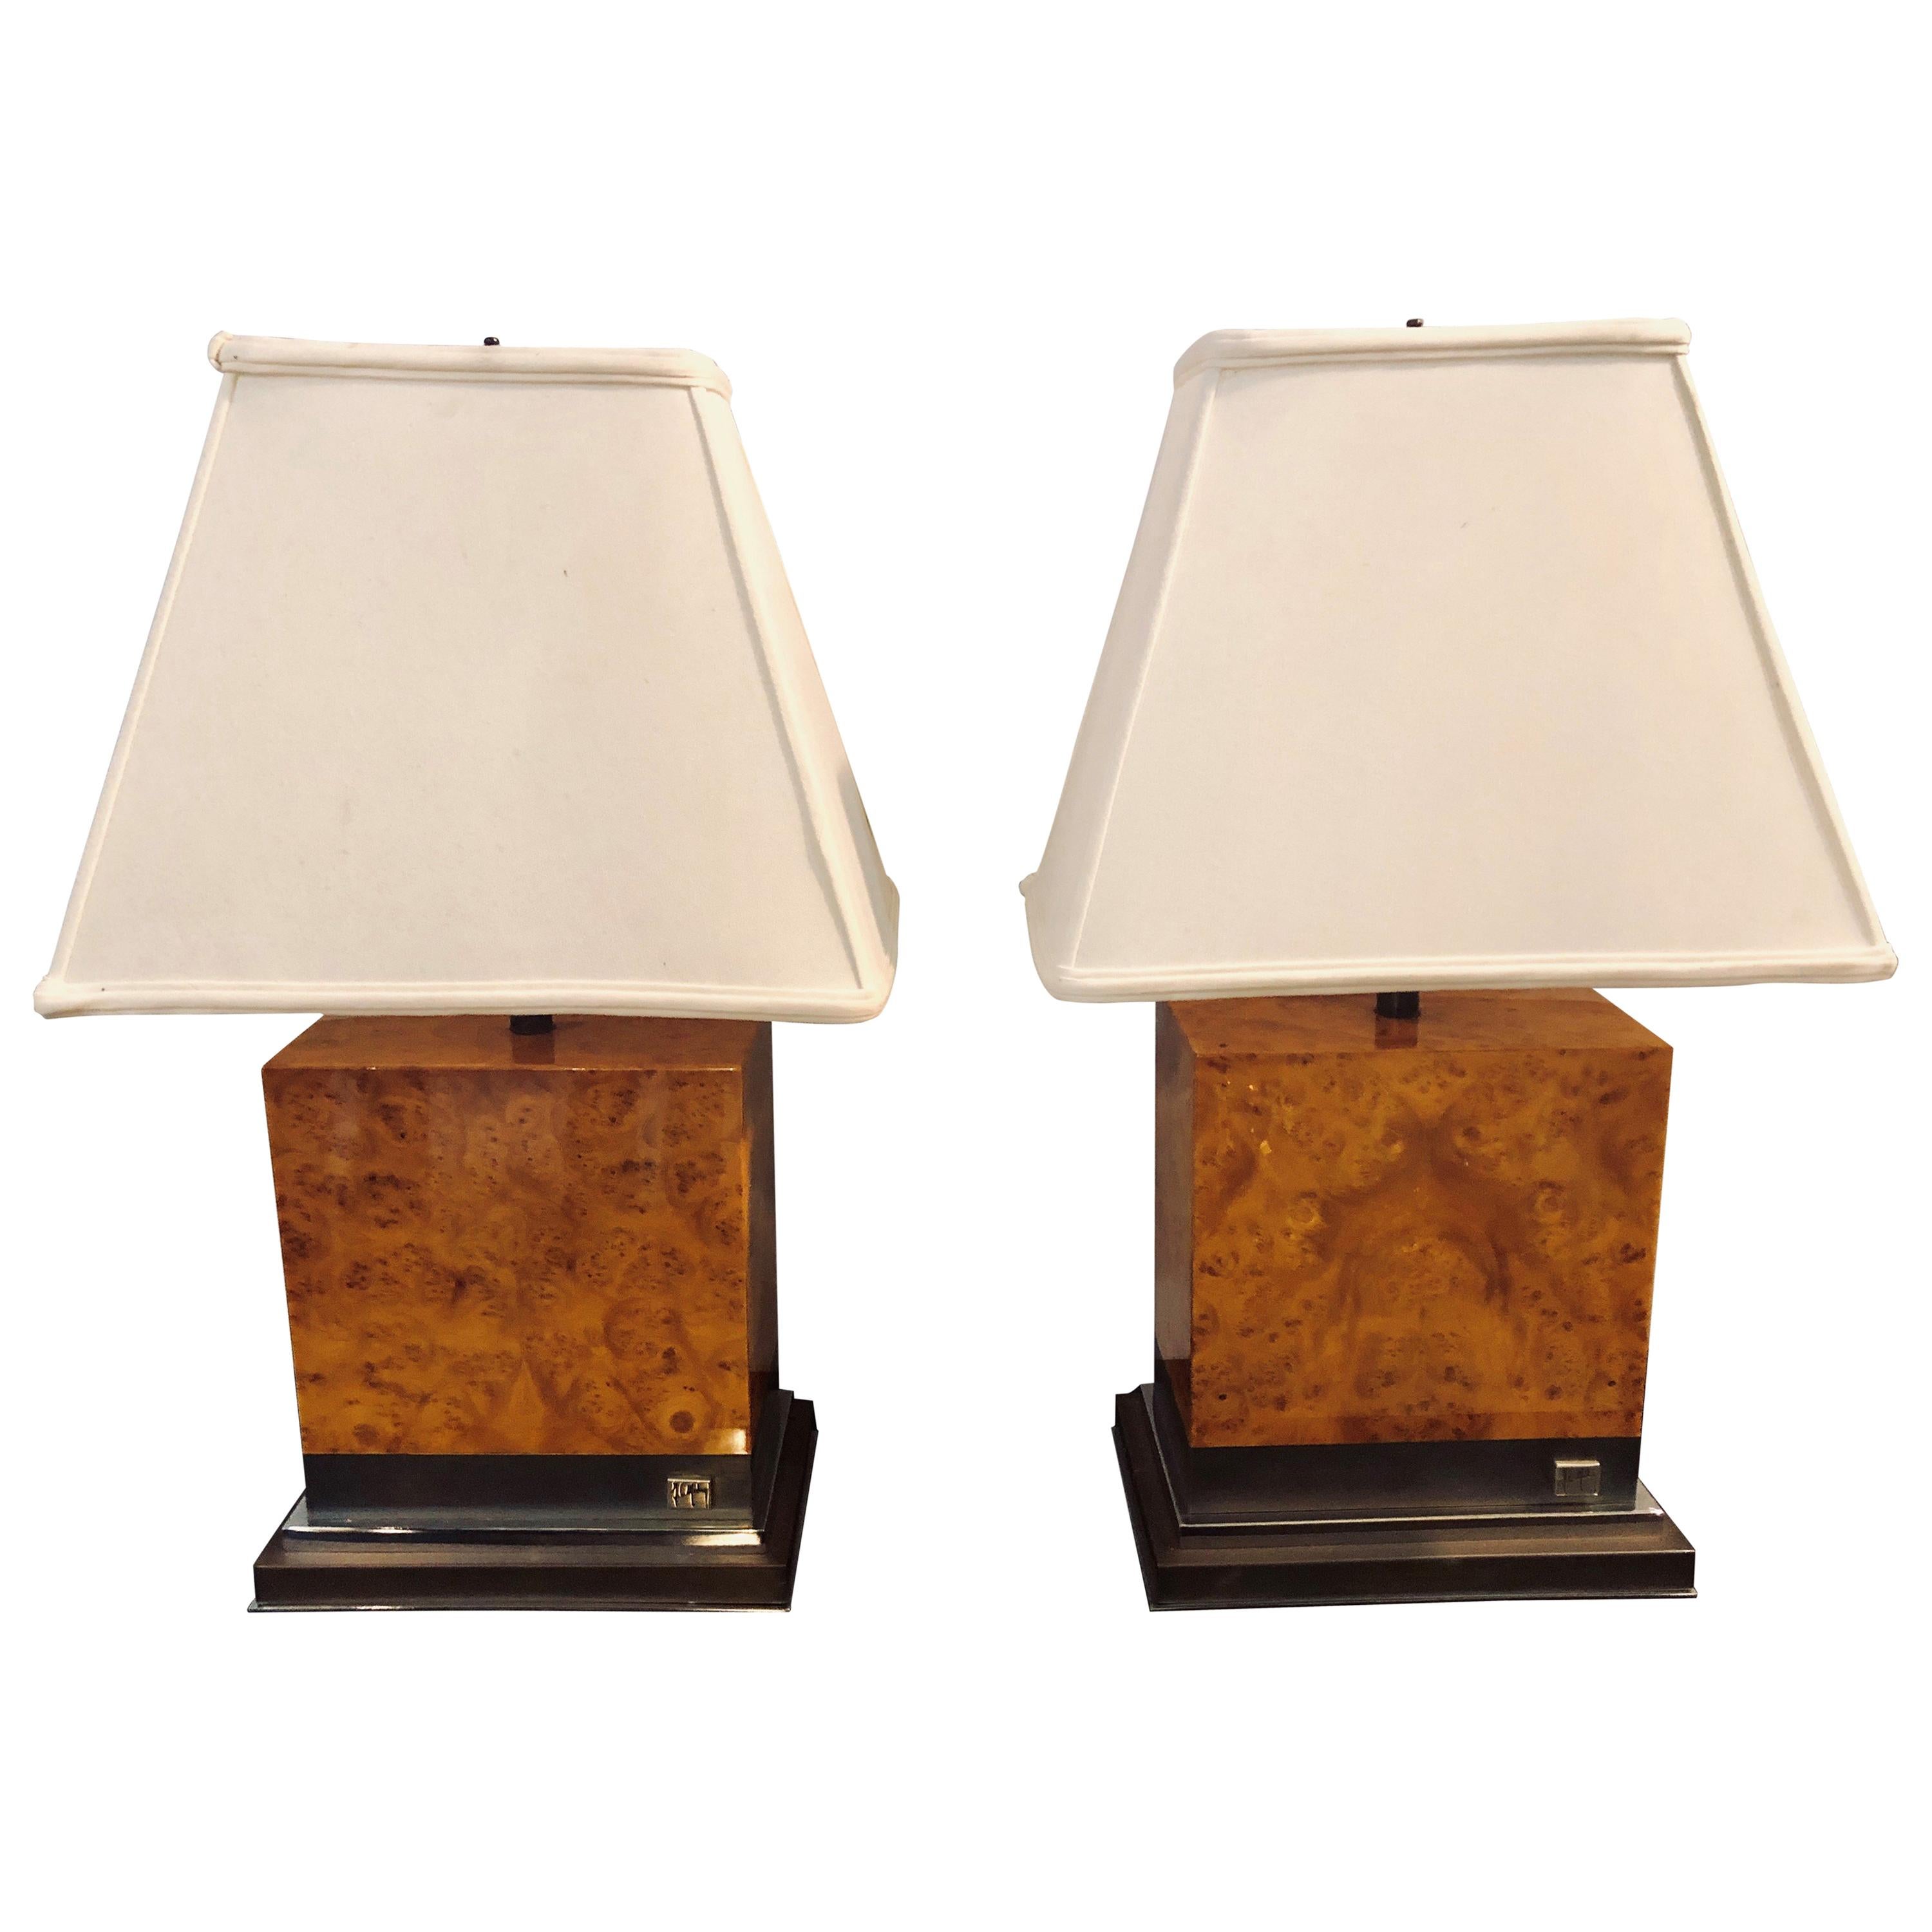 Jean Claude Mahey, Mid-Century Modern Table Lamps, Burlwood, Brass, France 1960s For Sale